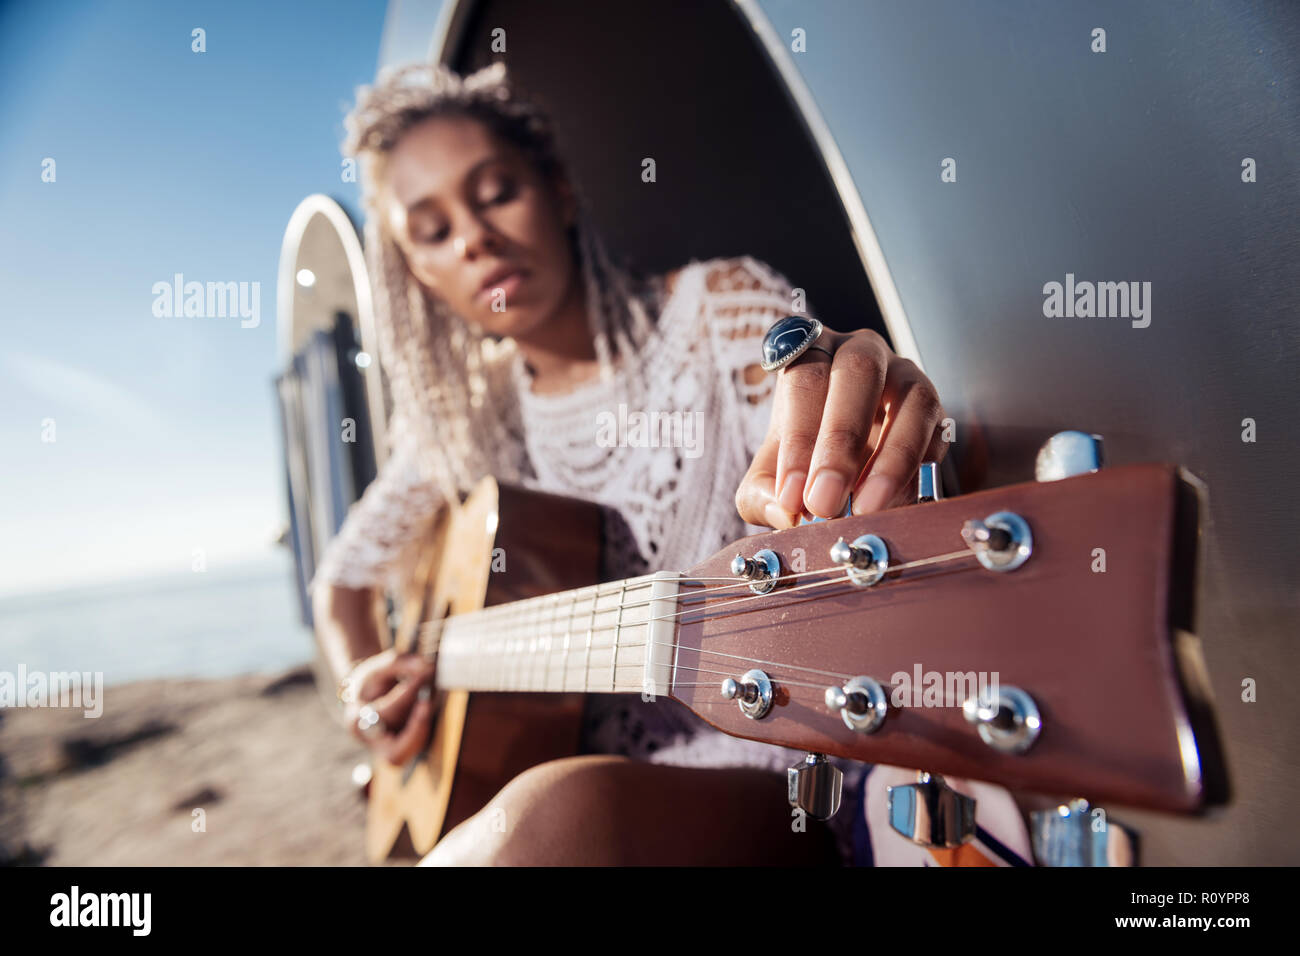 Close up of woman with dreadlocks tuning the guitar sitting in trailer Stock Photo